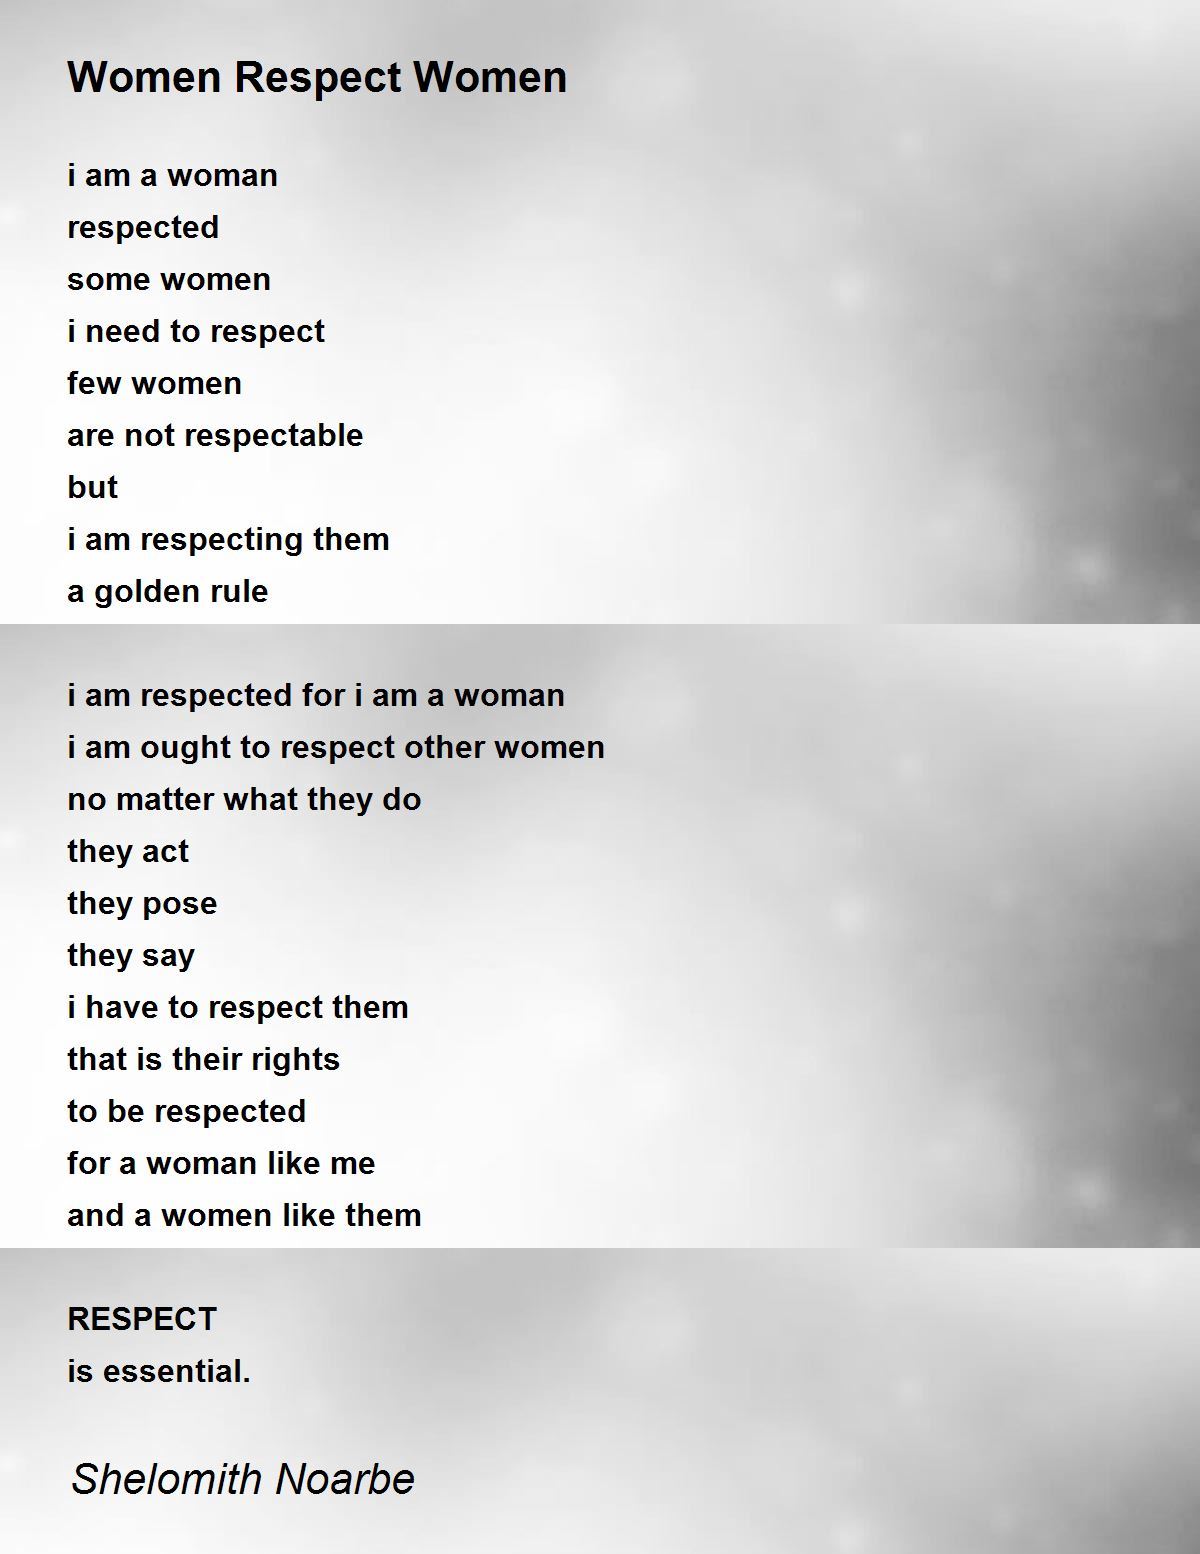 Women Respect Women - Women Respect Women Poem by Shelomith Noarbe